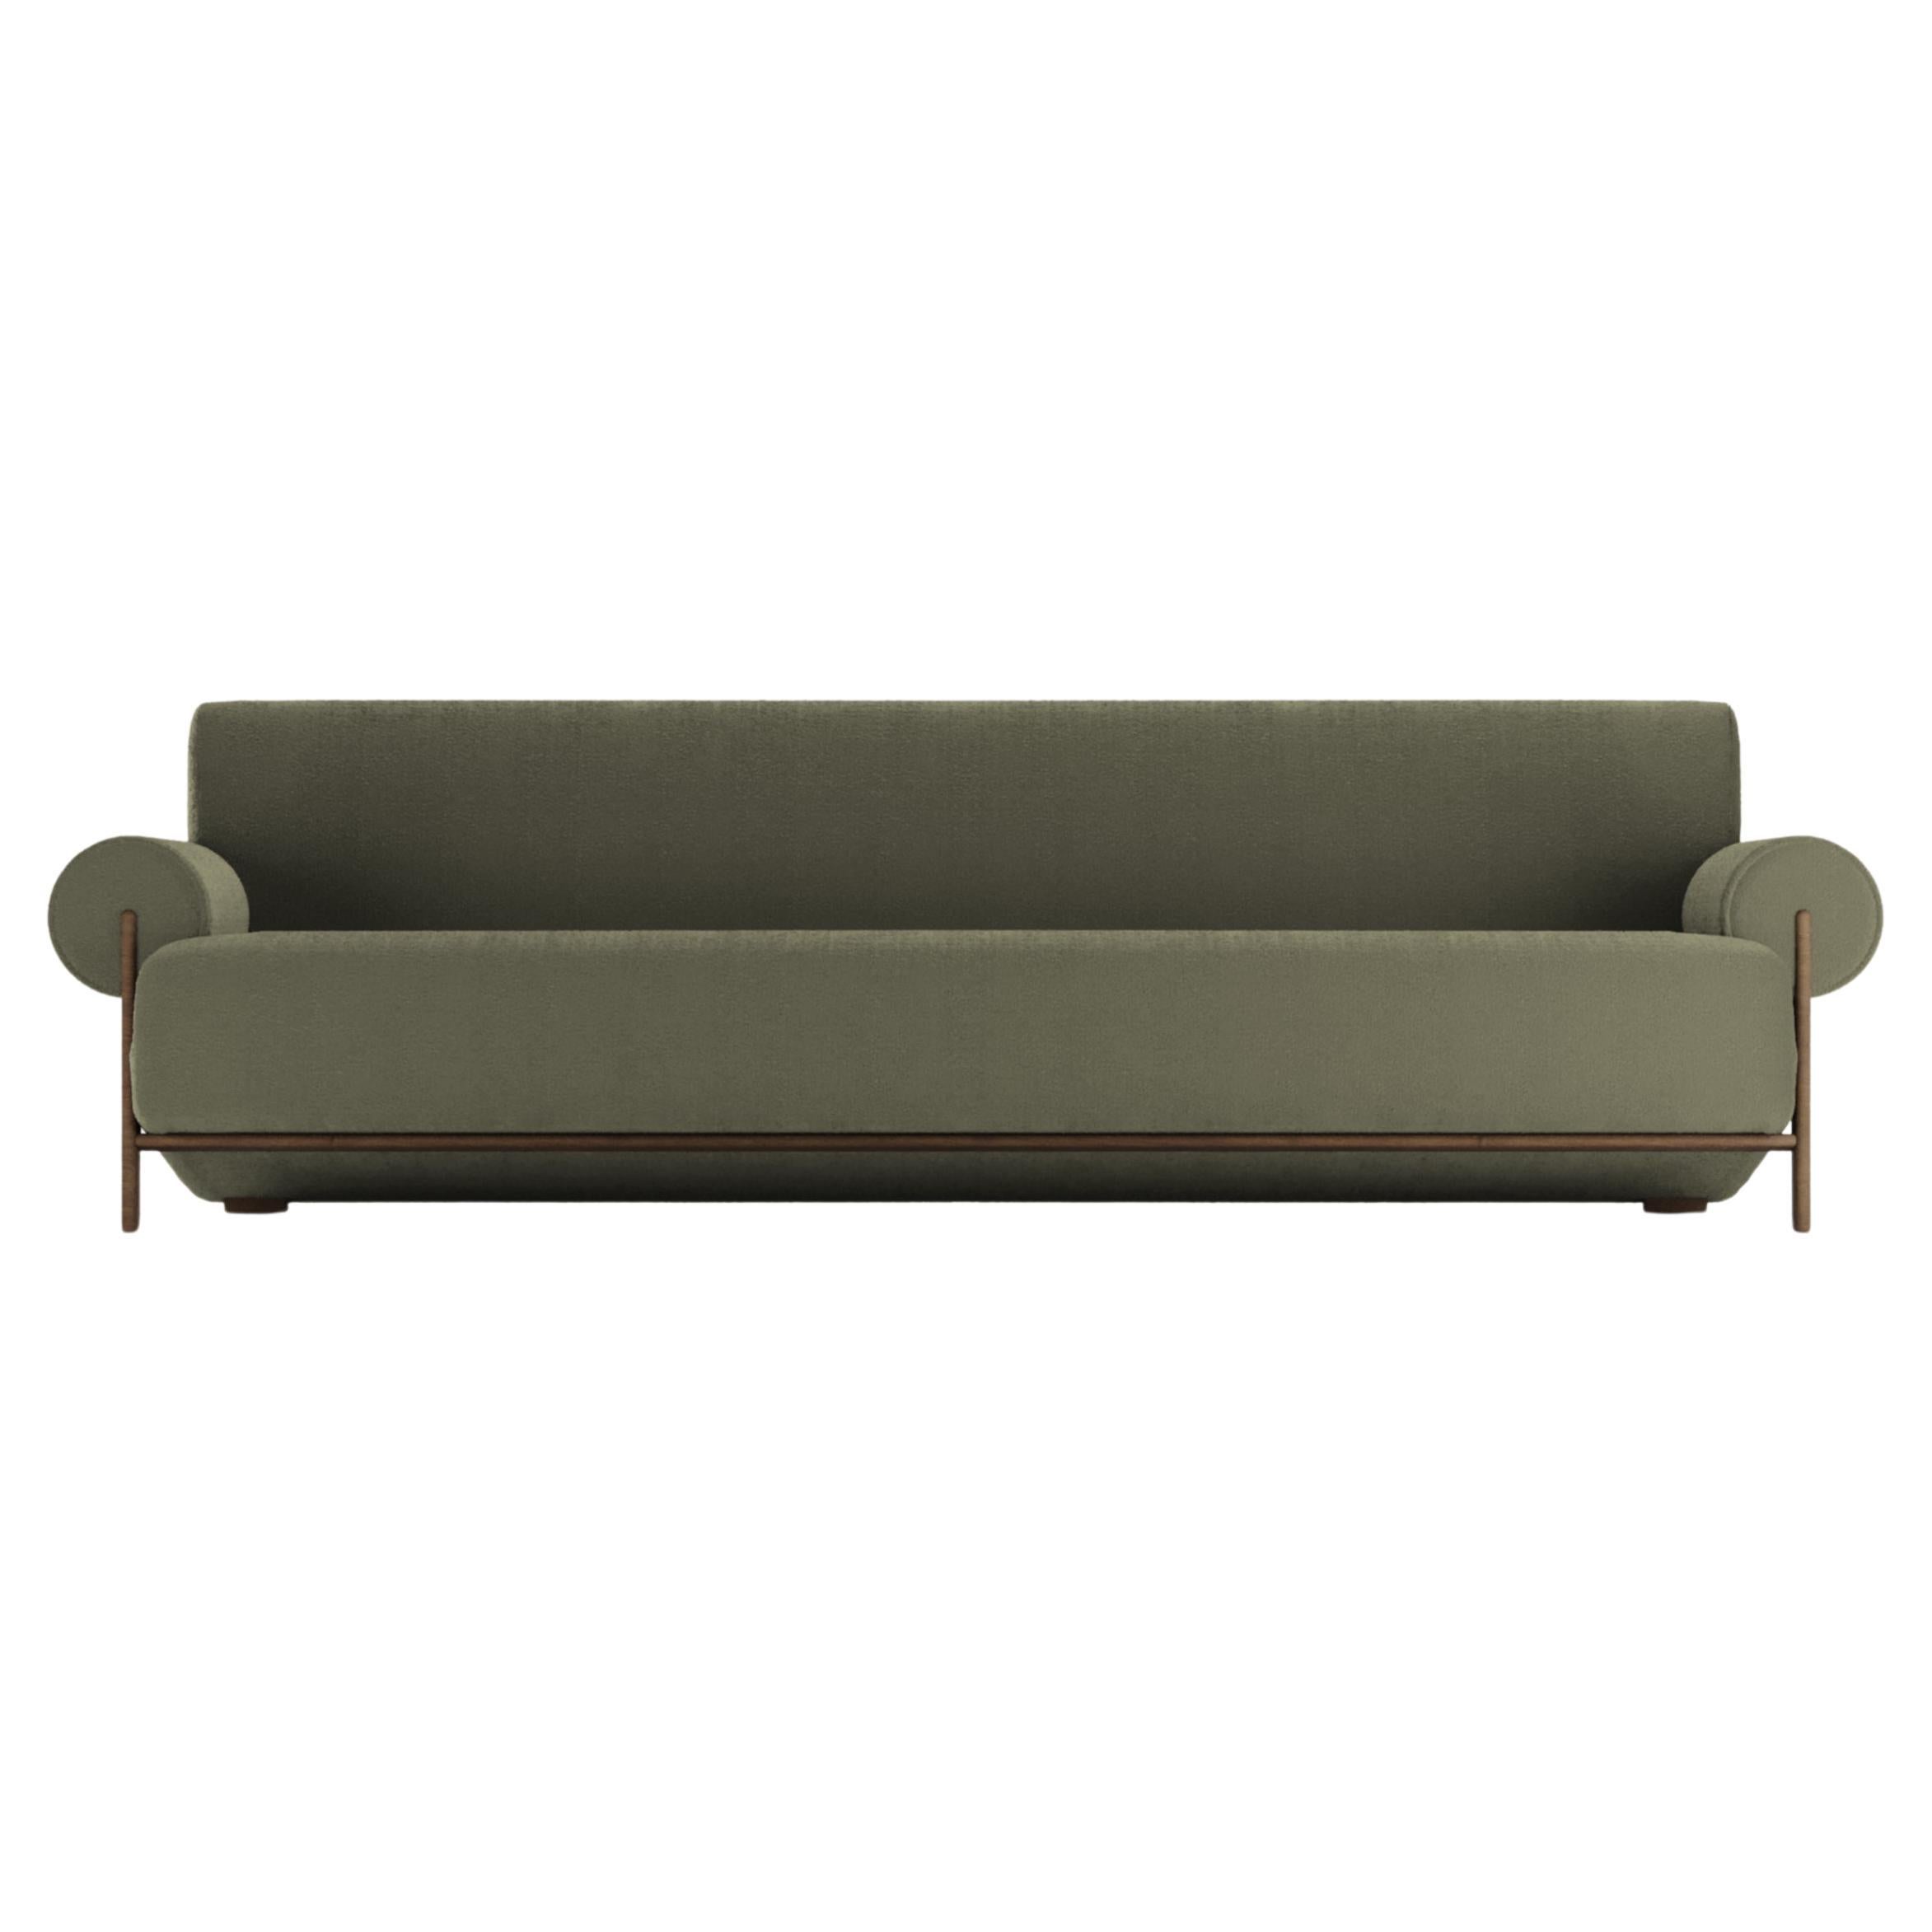 Contemporary Modern Paloma Sofa in Bouclé Olive by Collector For Sale